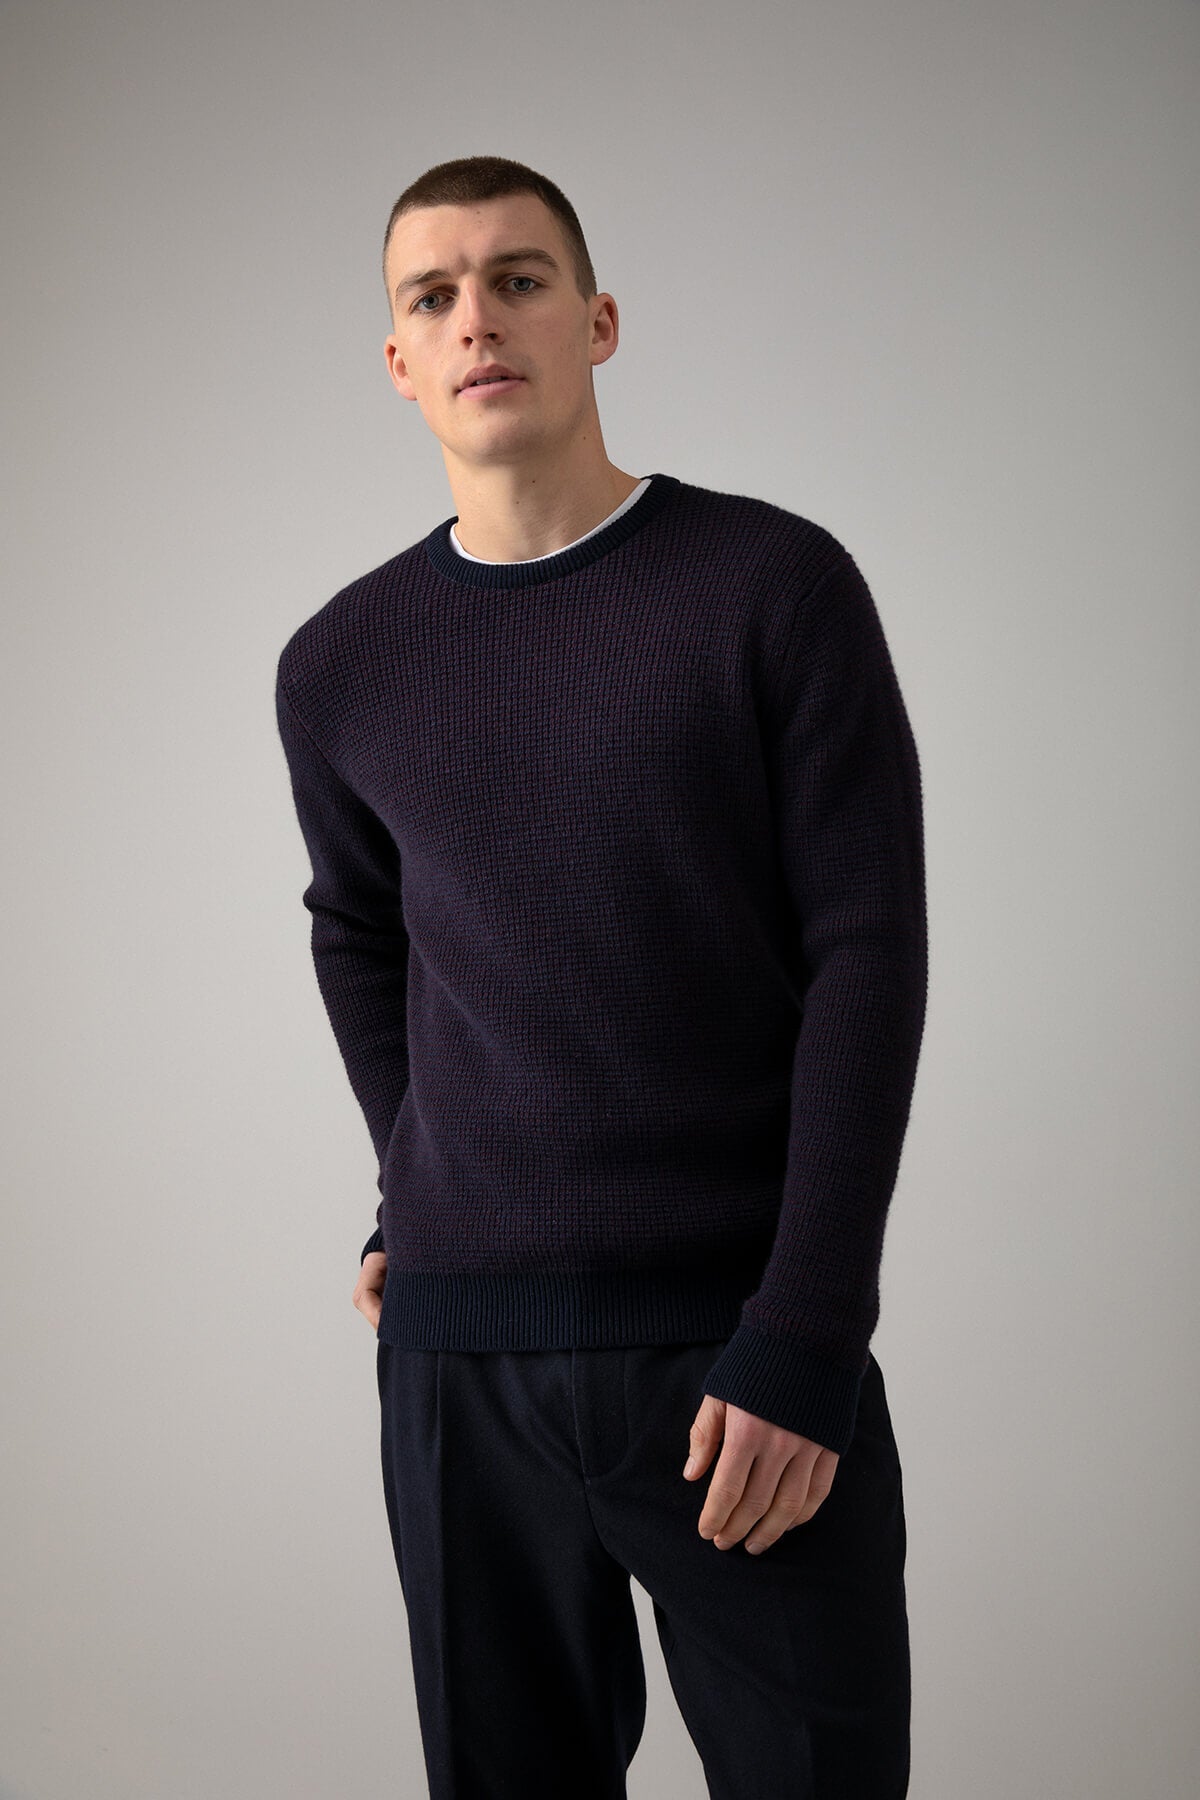 Johnstons of Elgin’s Men's Textured Waffle Rib Cashmere Jumper in Bramble on model wearing navy trousers on a grey background KAA05042Q23701